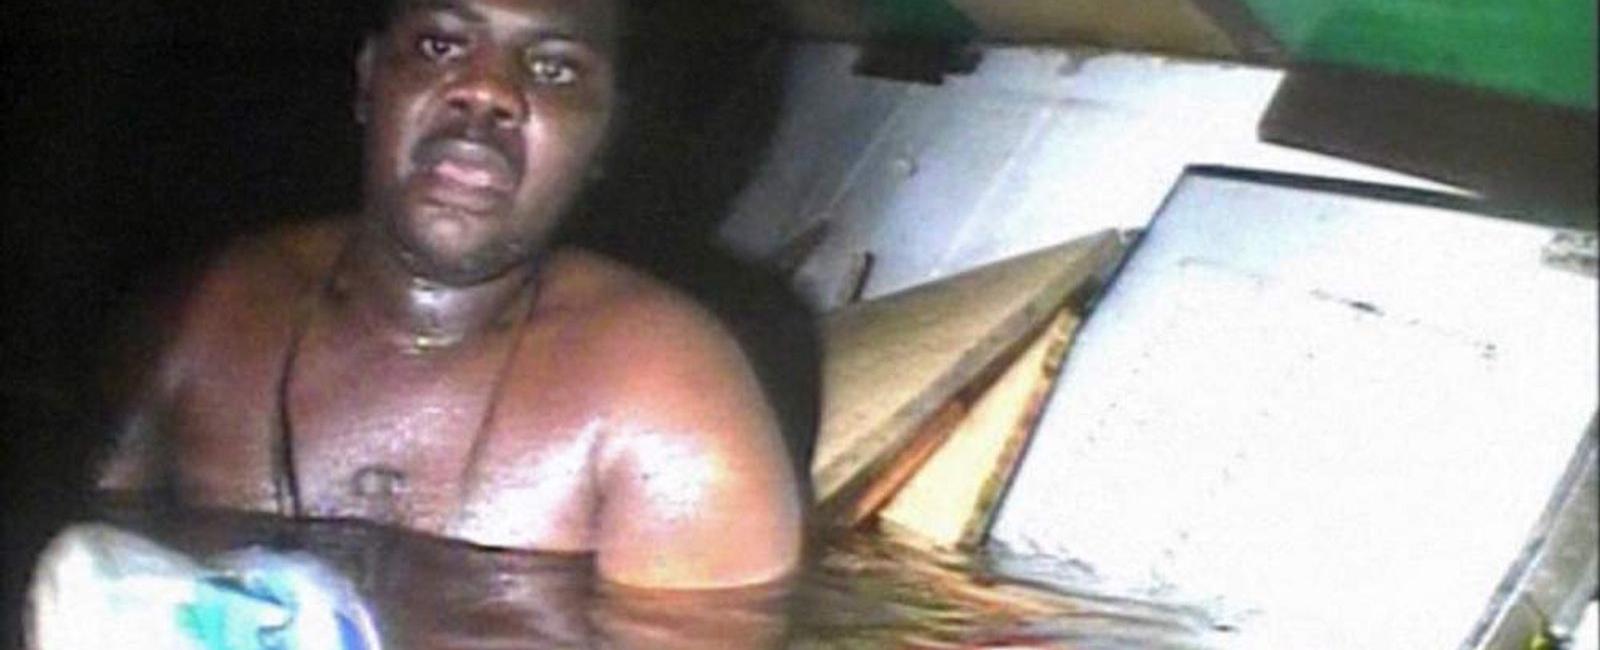 A man survived in a sunken ship for nearly three days 270 feet underwater in pitch darkness while listening to fish eat the corpses of his shipmates